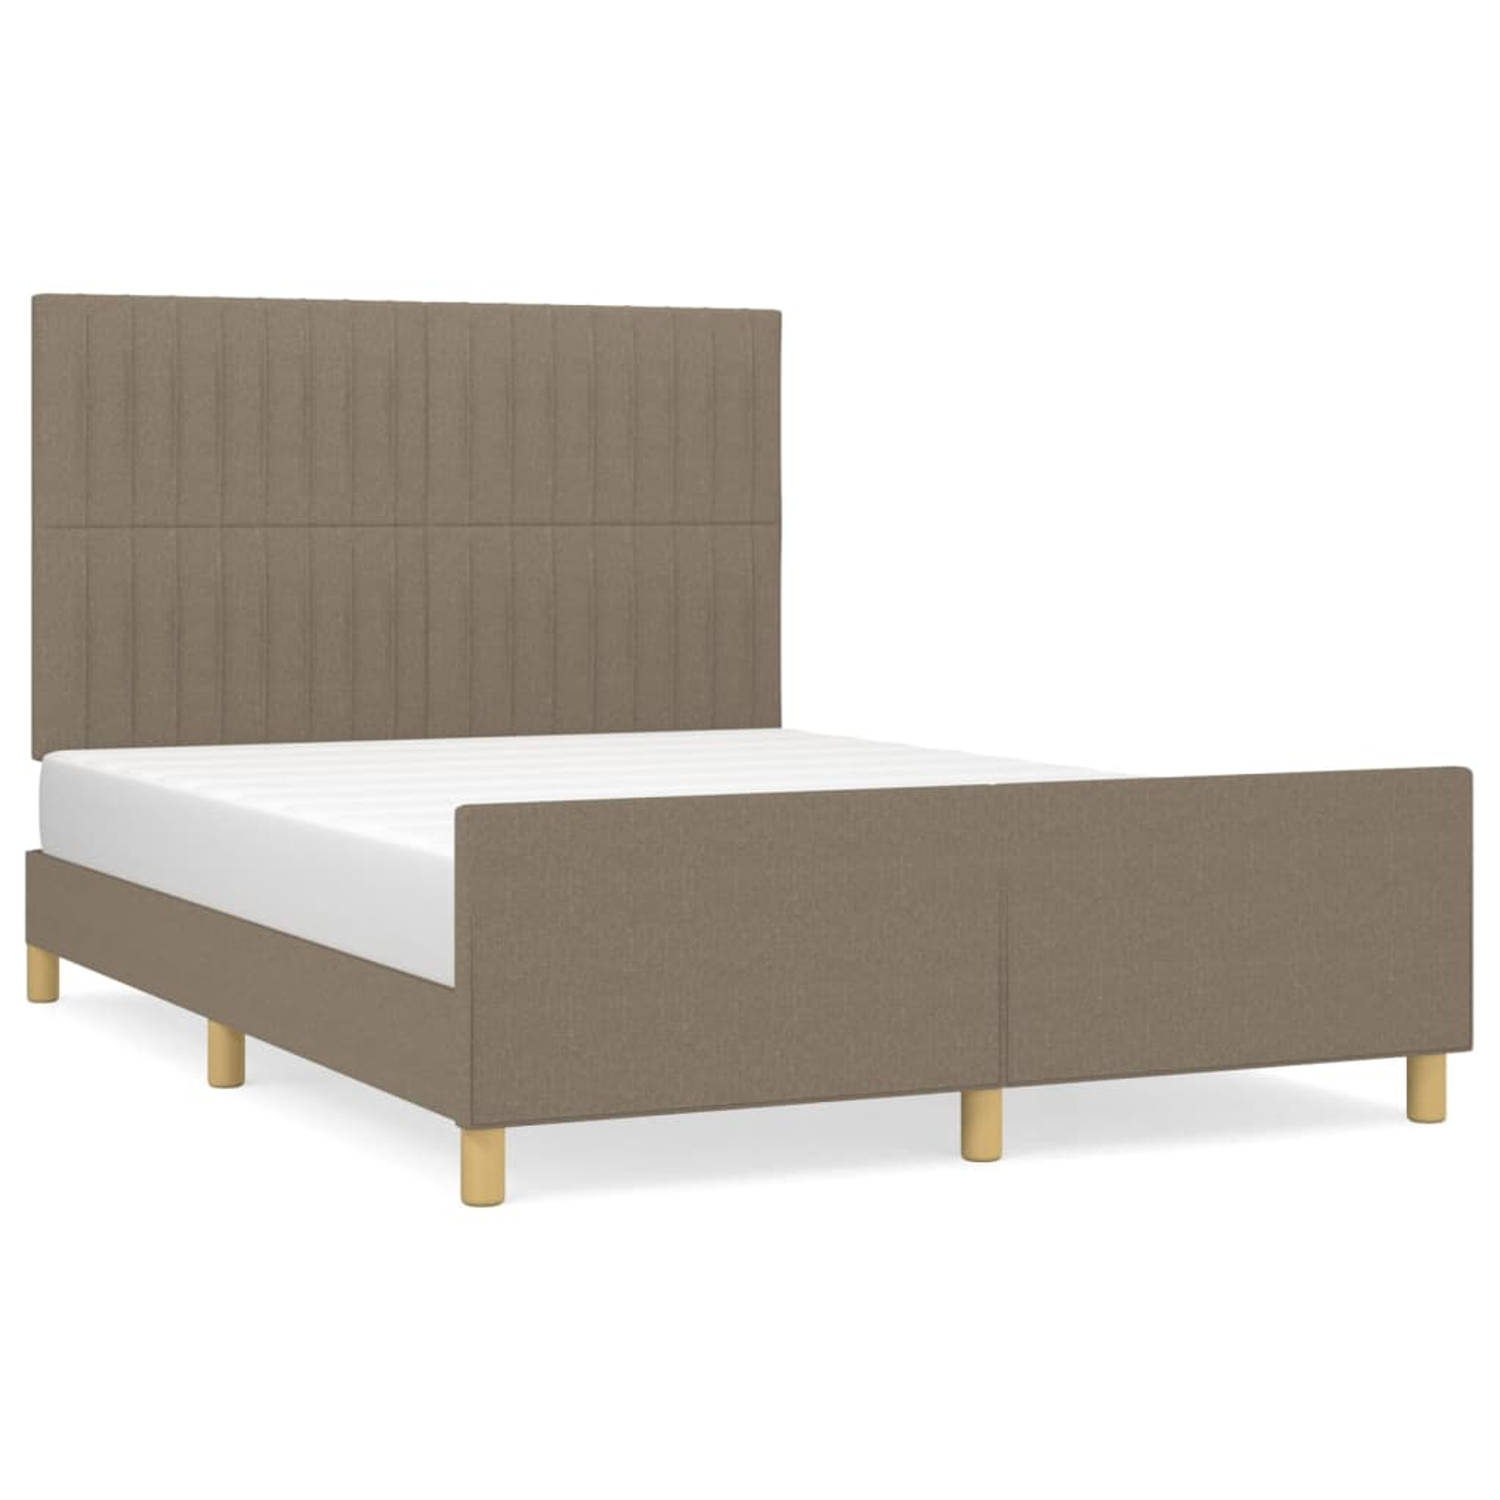 The Living Store Bedframe - Hoofdeind - 193 x 146 x 118/128 cm - Taupe